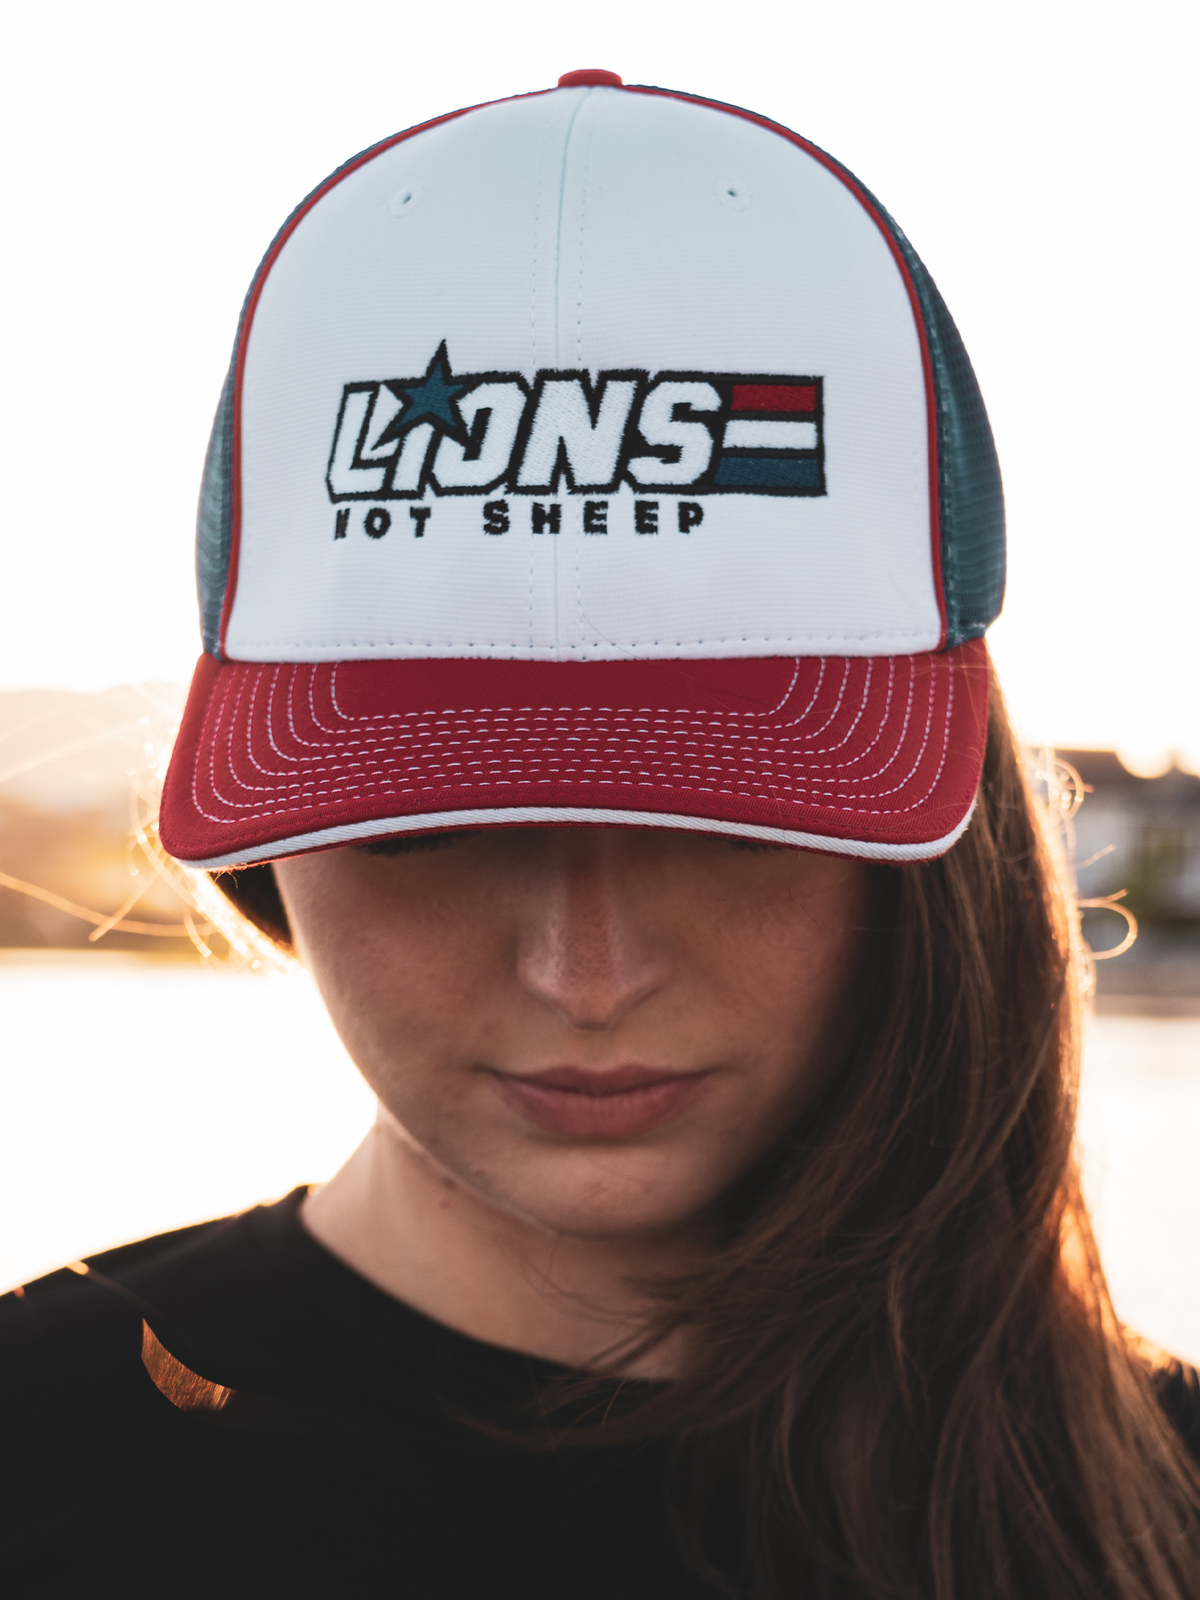 AMERICAN HERO Hat (Red/White/Blue) - Lions Not Sheep ®